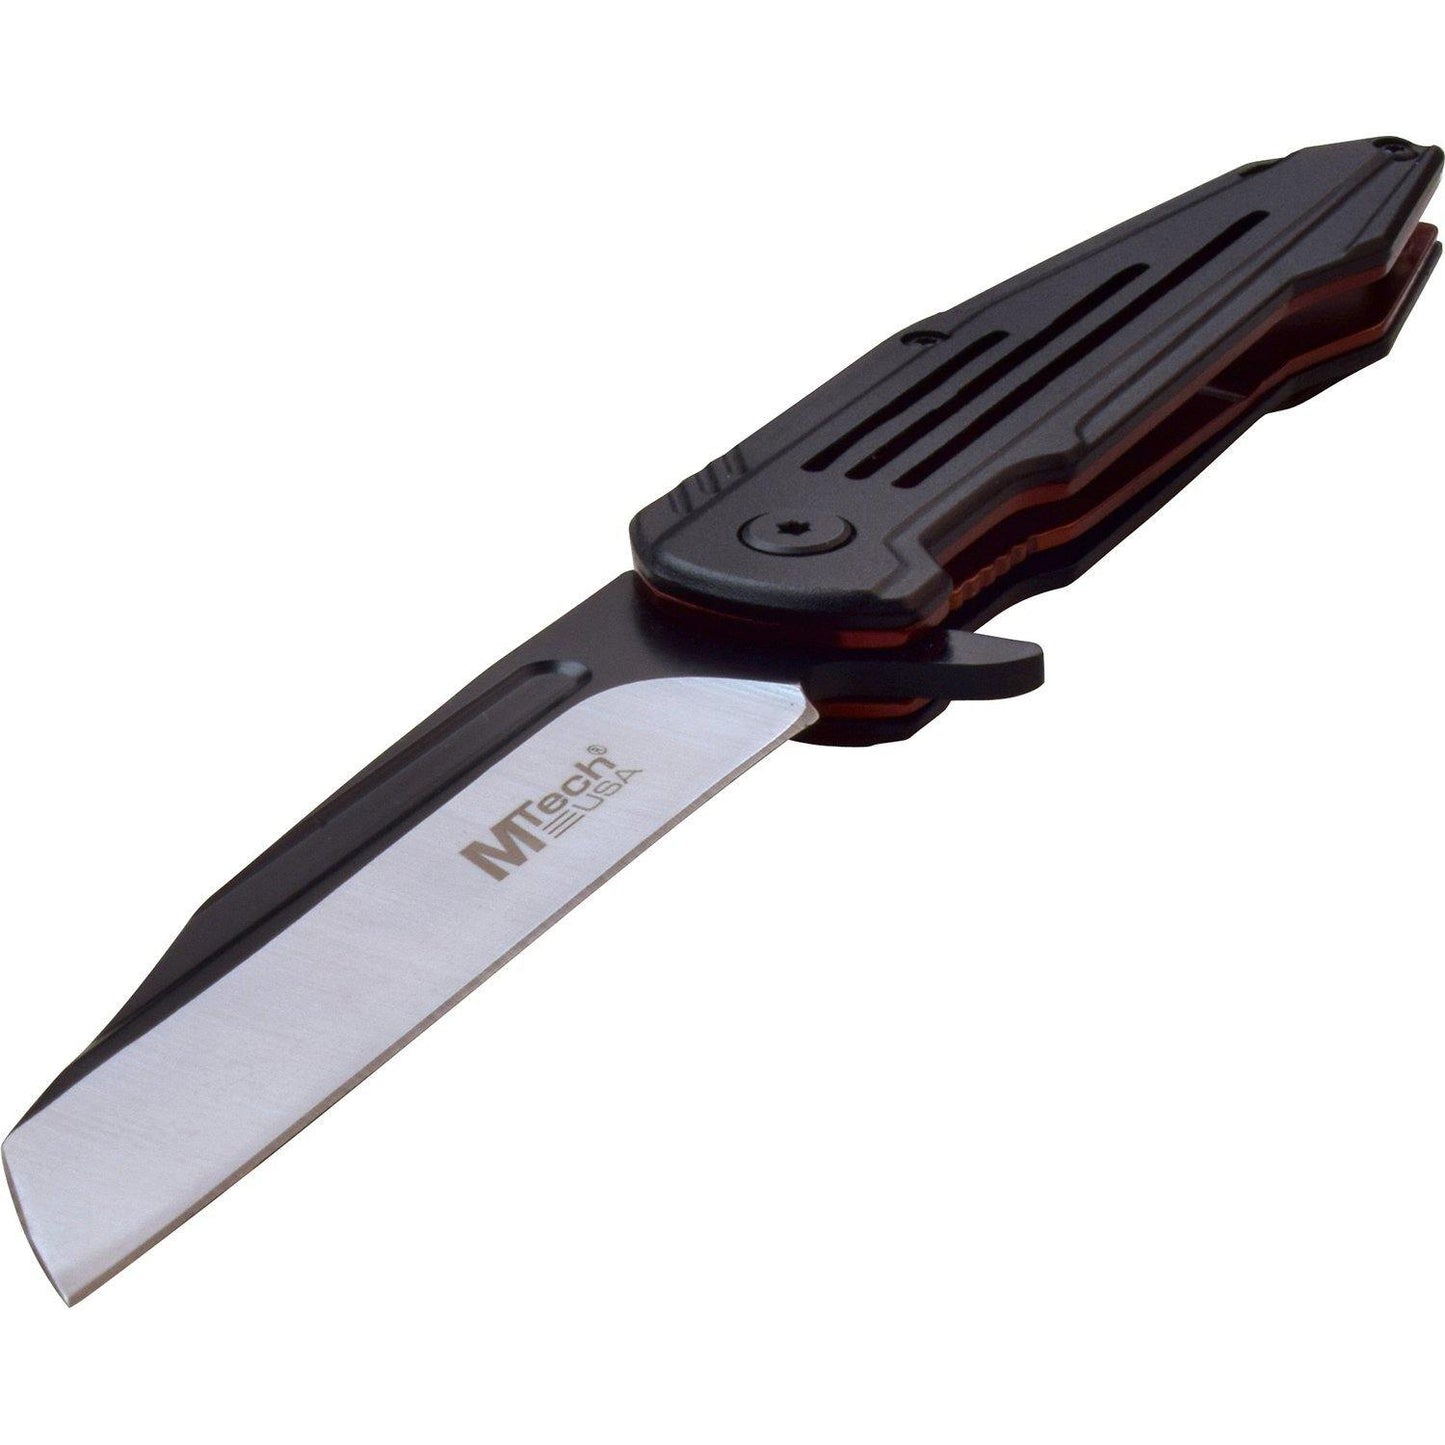 Mtech Wharncliffe Fine Edge Blade Manual Folding Knife - 8 Inches Overall #mt-1060Rd - Xhunter New Zealand